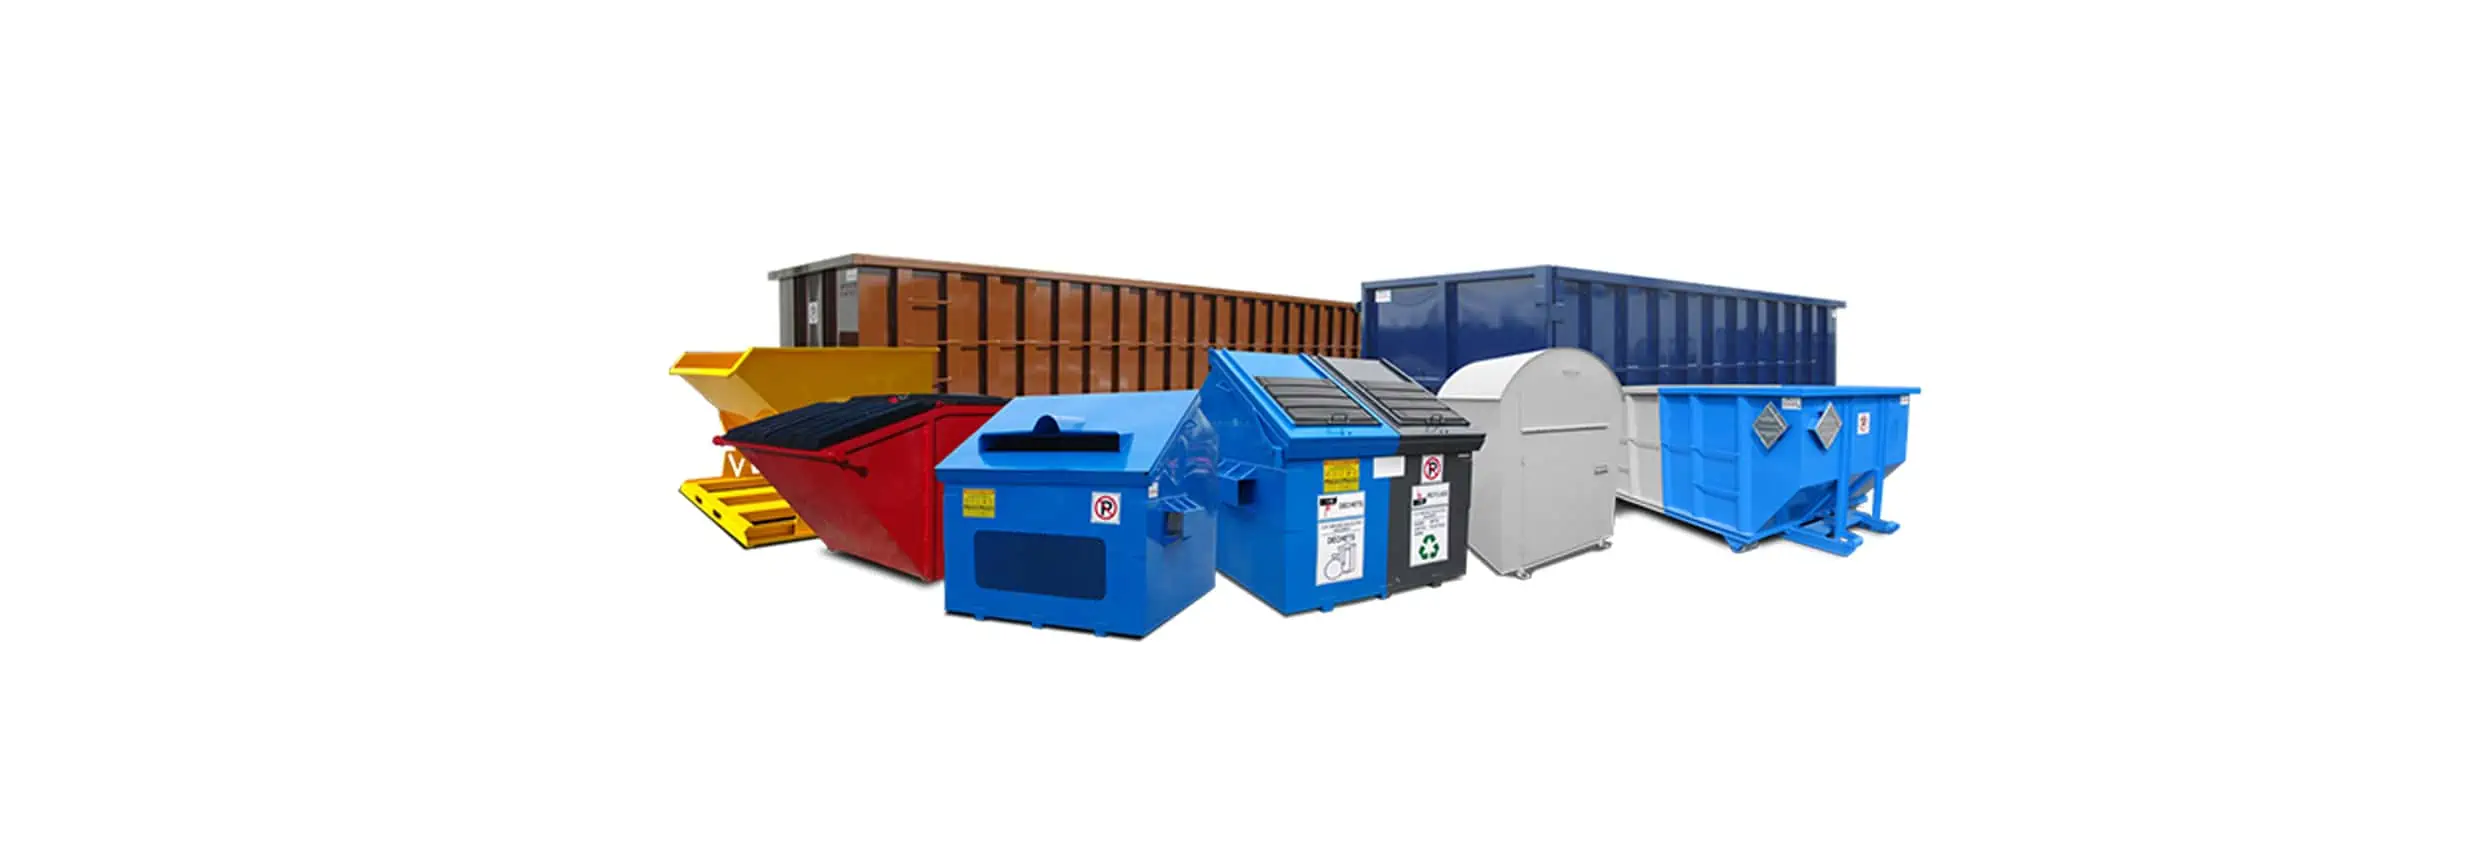 finding-your-way-among-the-many-options-available-when-buying-a-waste-container